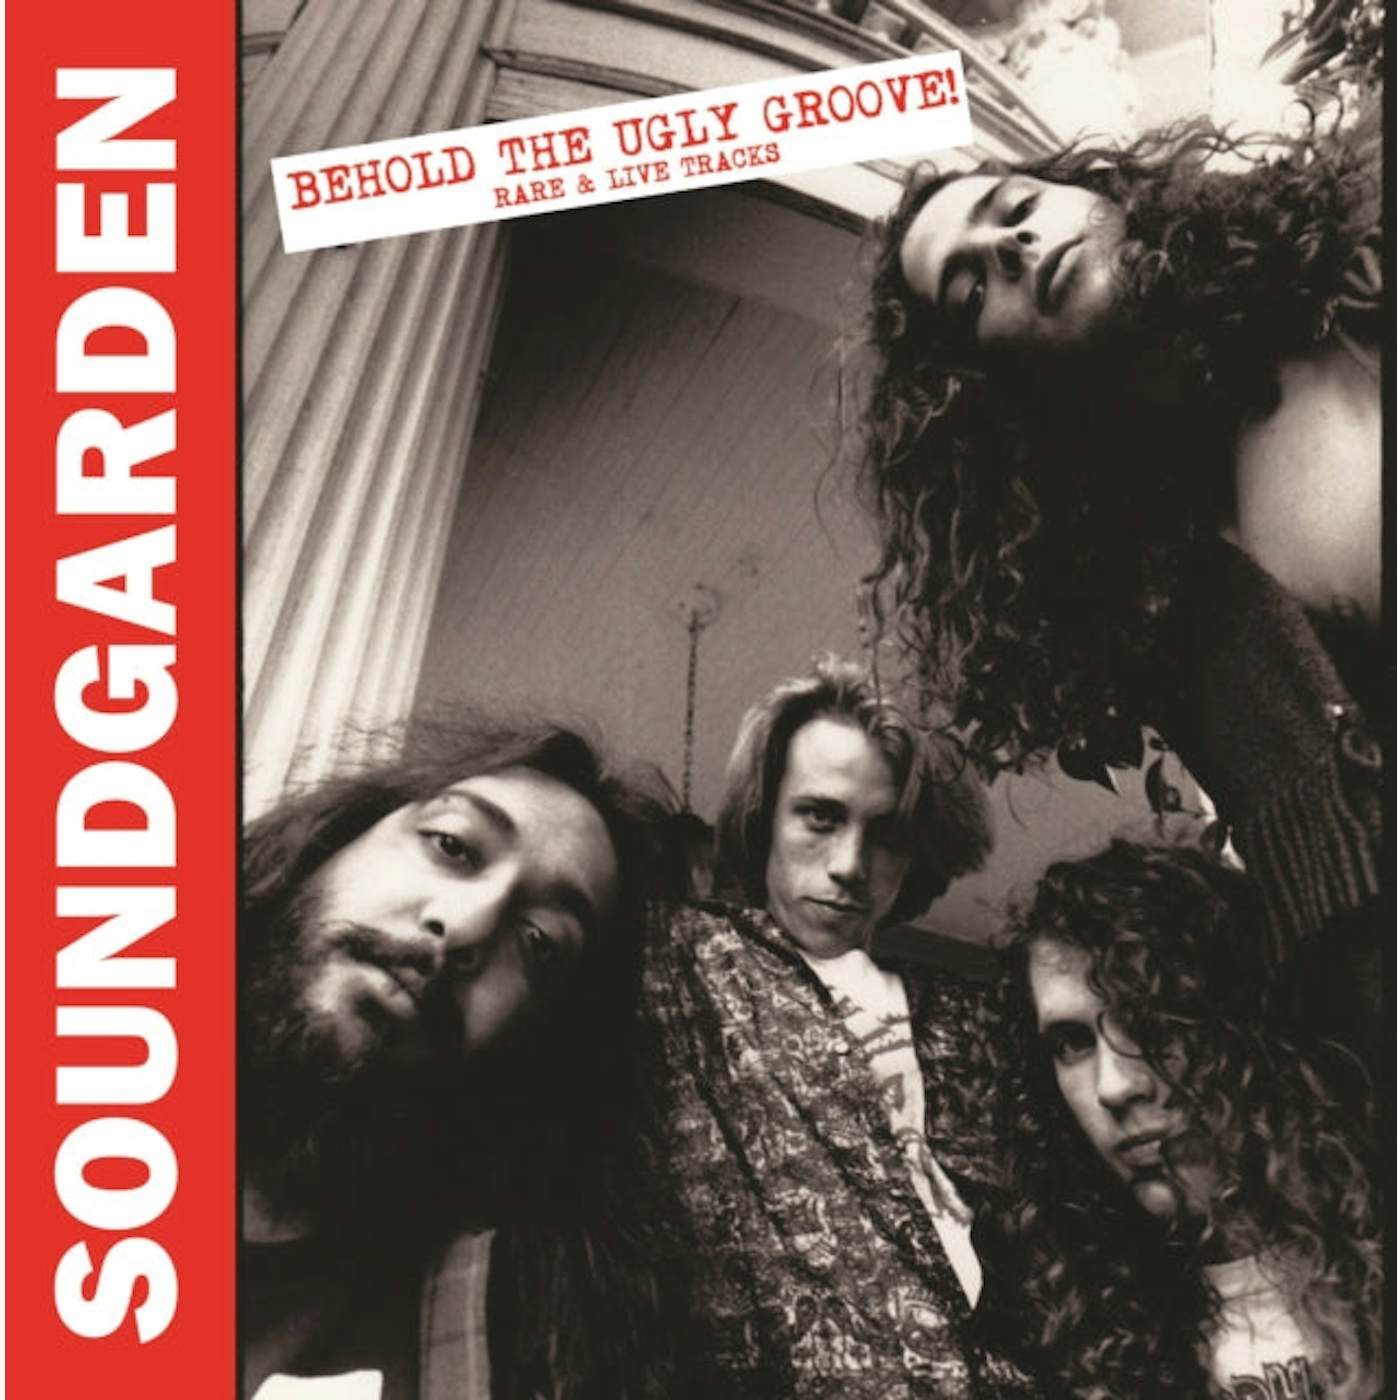 Soundgarden LP Vinyl Record - Behold The Ugly Groove! Rare & Live Tracks